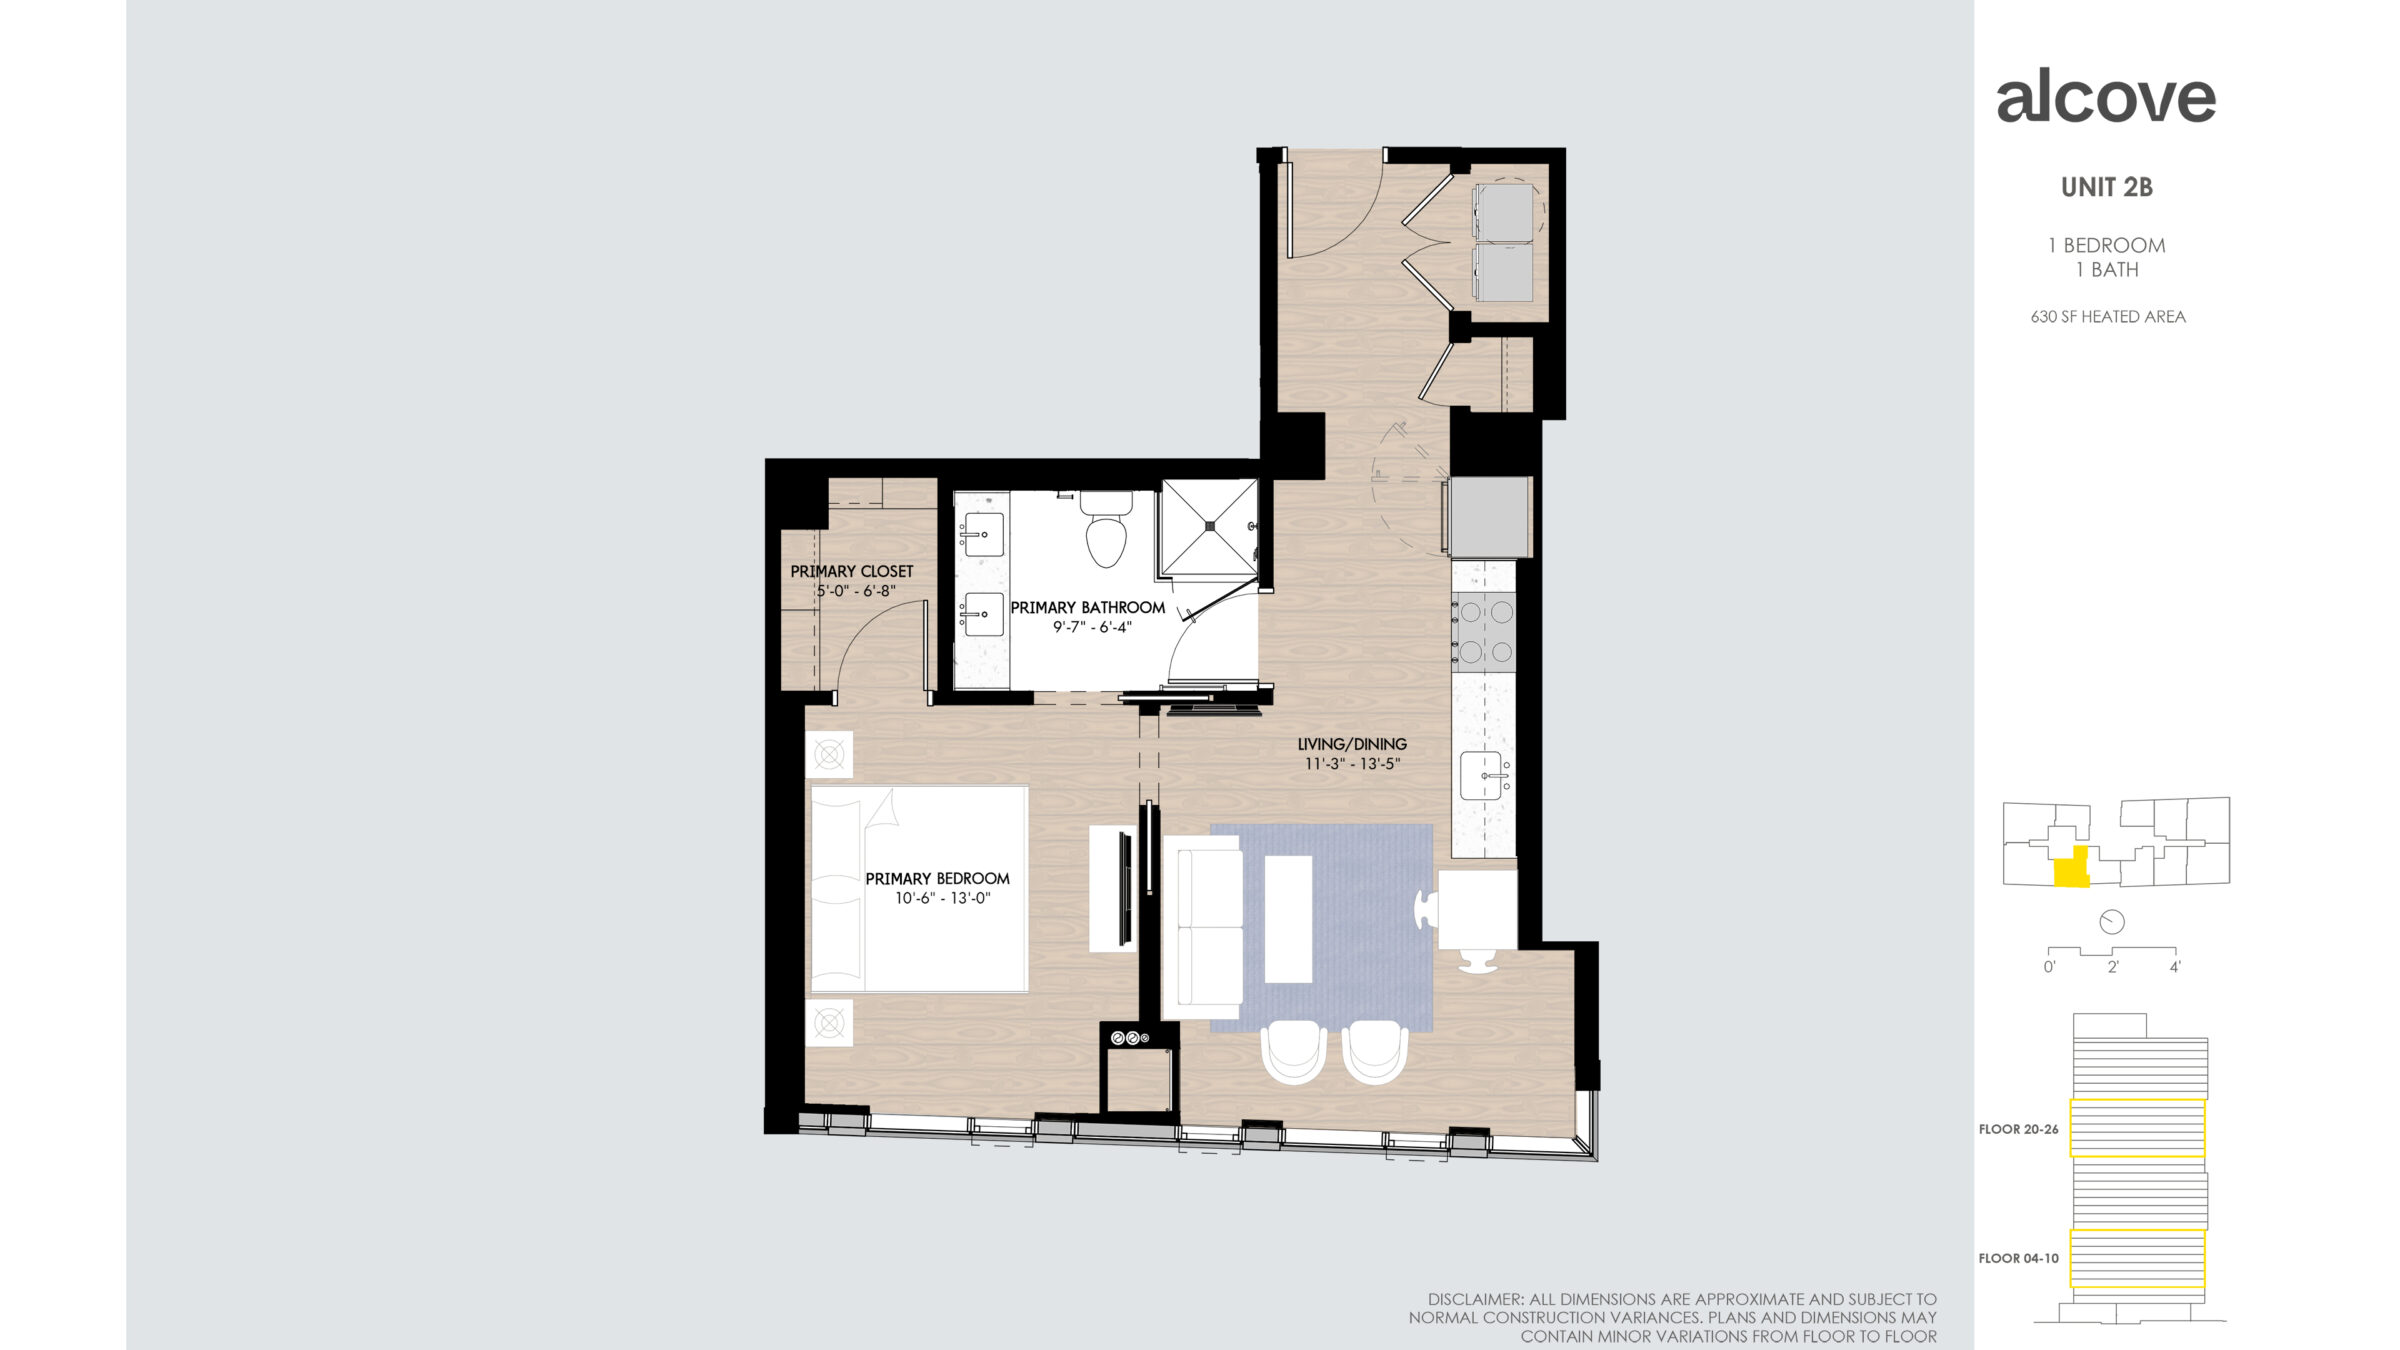 Image Reads: UNIT 2B 1 BEDROOM 1 BATH 630 SF HEATED AREA Disclaimer: all dimensions are approximate and subject to normal construction variances. Plans and dimensions may contain minor variations from floor to floor. Floor 20-26 Floor4-10